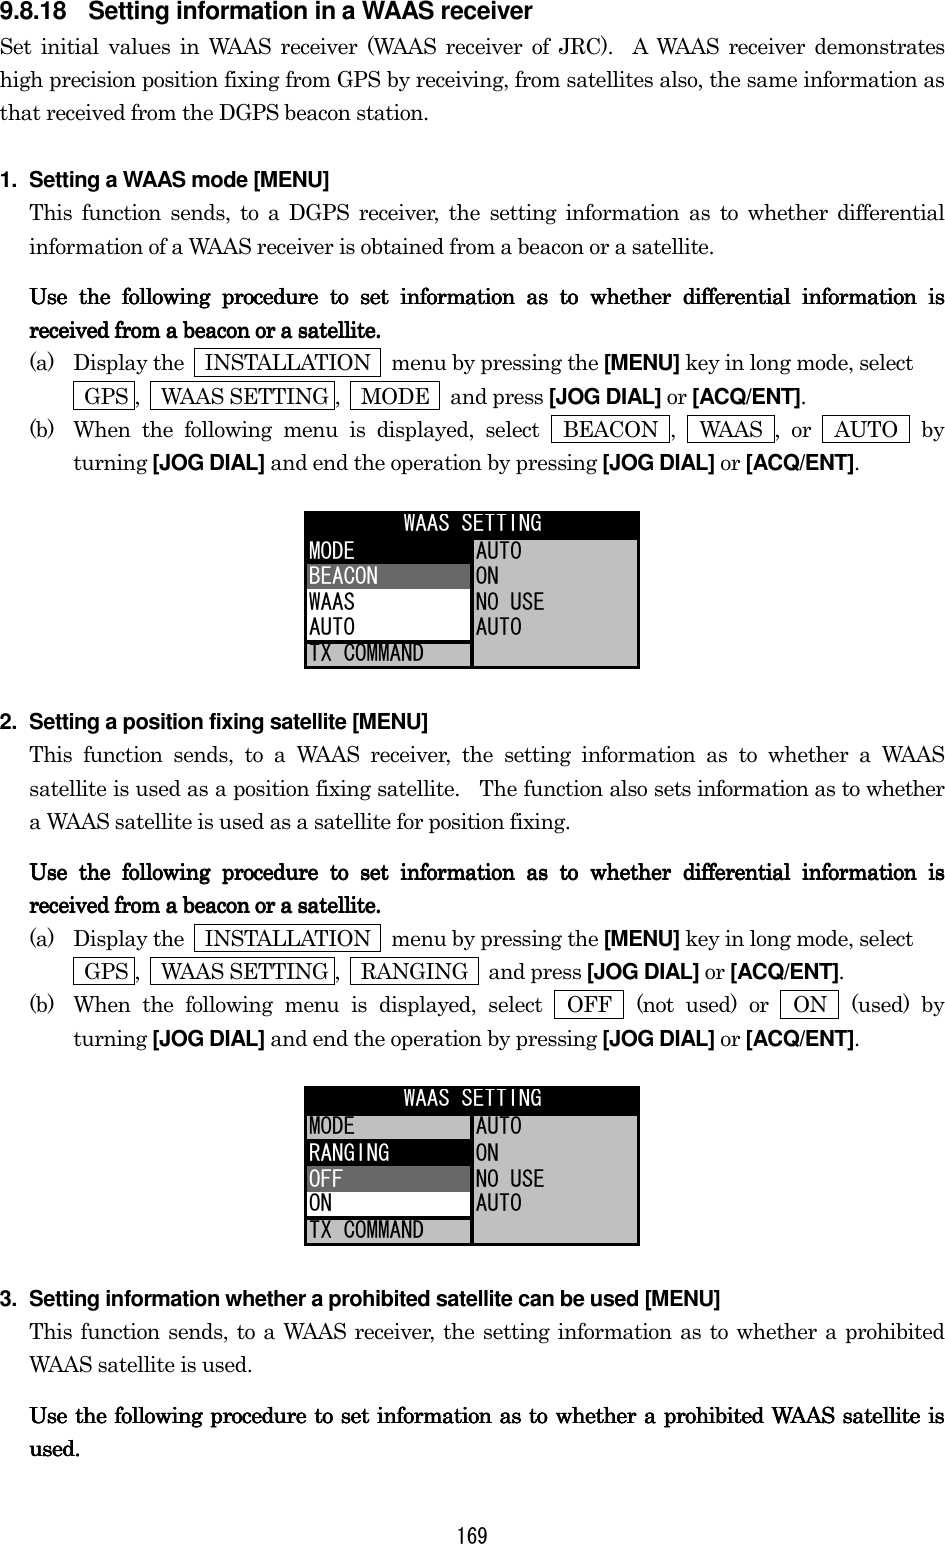 169 9.8.18  Setting information in a WAAS receiver Set initial values in WAAS receiver (WAAS receiver of JRC).  A WAAS receiver demonstrates high precision position fixing from GPS by receiving, from satellites also, the same information as that received from the DGPS beacon station. 1.  Setting a WAAS mode [MENU] This function sends, to a DGPS receiver, the setting information as to whether differential information of a WAAS receiver is obtained from a beacon or a satellite.   Use the following procedure to set information as to whether differential information is Use the following procedure to set information as to whether differential information is Use the following procedure to set information as to whether differential information is Use the following procedure to set information as to whether differential information is rererereceived from a beacon or a satellite.ceived from a beacon or a satellite.ceived from a beacon or a satellite.ceived from a beacon or a satellite.    (a)  Display the    INSTALLATION    menu by pressing the [MENU] key in long mode, select    GPS ,  WAAS SETTING ,  MODE  and press [JOG DIAL] or [ACQ/ENT]. (b)  When the following menu is displayed, select  BEACON ,  WAAS , or  AUTO  by turning [JOG DIAL] and end the operation by pressing [JOG DIAL] or [ACQ/ENT]. MODE AUTOBEACON ONWAAS NO USEAUTO AUTOTX COMMANDWAAS SETTING 2.  Setting a position fixing satellite [MENU] This function sends, to a WAAS receiver, the setting information as to whether a WAAS satellite is used as a position fixing satellite.    The function also sets information as to whether a WAAS satellite is used as a satellite for position fixing. Use the following procedure to set information as to whether differential information is Use the following procedure to set information as to whether differential information is Use the following procedure to set information as to whether differential information is Use the following procedure to set information as to whether differential information is received from received from received from received from a beacon or a satellite.a beacon or a satellite.a beacon or a satellite.a beacon or a satellite.    (a)  Display the    INSTALLATION    menu by pressing the [MENU] key in long mode, select     GPS ,    WAAS SETTING ,    RANGING    and press [JOG DIAL] or [ACQ/ENT]. (b)  When the following menu is displayed, select  OFF  (not used) or  ON  (used) by turning [JOG DIAL] and end the operation by pressing [JOG DIAL] or [ACQ/ENT]. MODE AUTORANGING ONOFF NO USEON AUTOTX COMMANDWAAS SETTING 3.  Setting information whether a prohibited satellite can be used [MENU] This function sends, to a WAAS receiver, the setting information as to whether a prohibited WAAS satellite is used. Use the following procedure to set information as to whether a prohibited WAAS satellite is Use the following procedure to set information as to whether a prohibited WAAS satellite is Use the following procedure to set information as to whether a prohibited WAAS satellite is Use the following procedure to set information as to whether a prohibited WAAS satellite is used.used.used.used.    